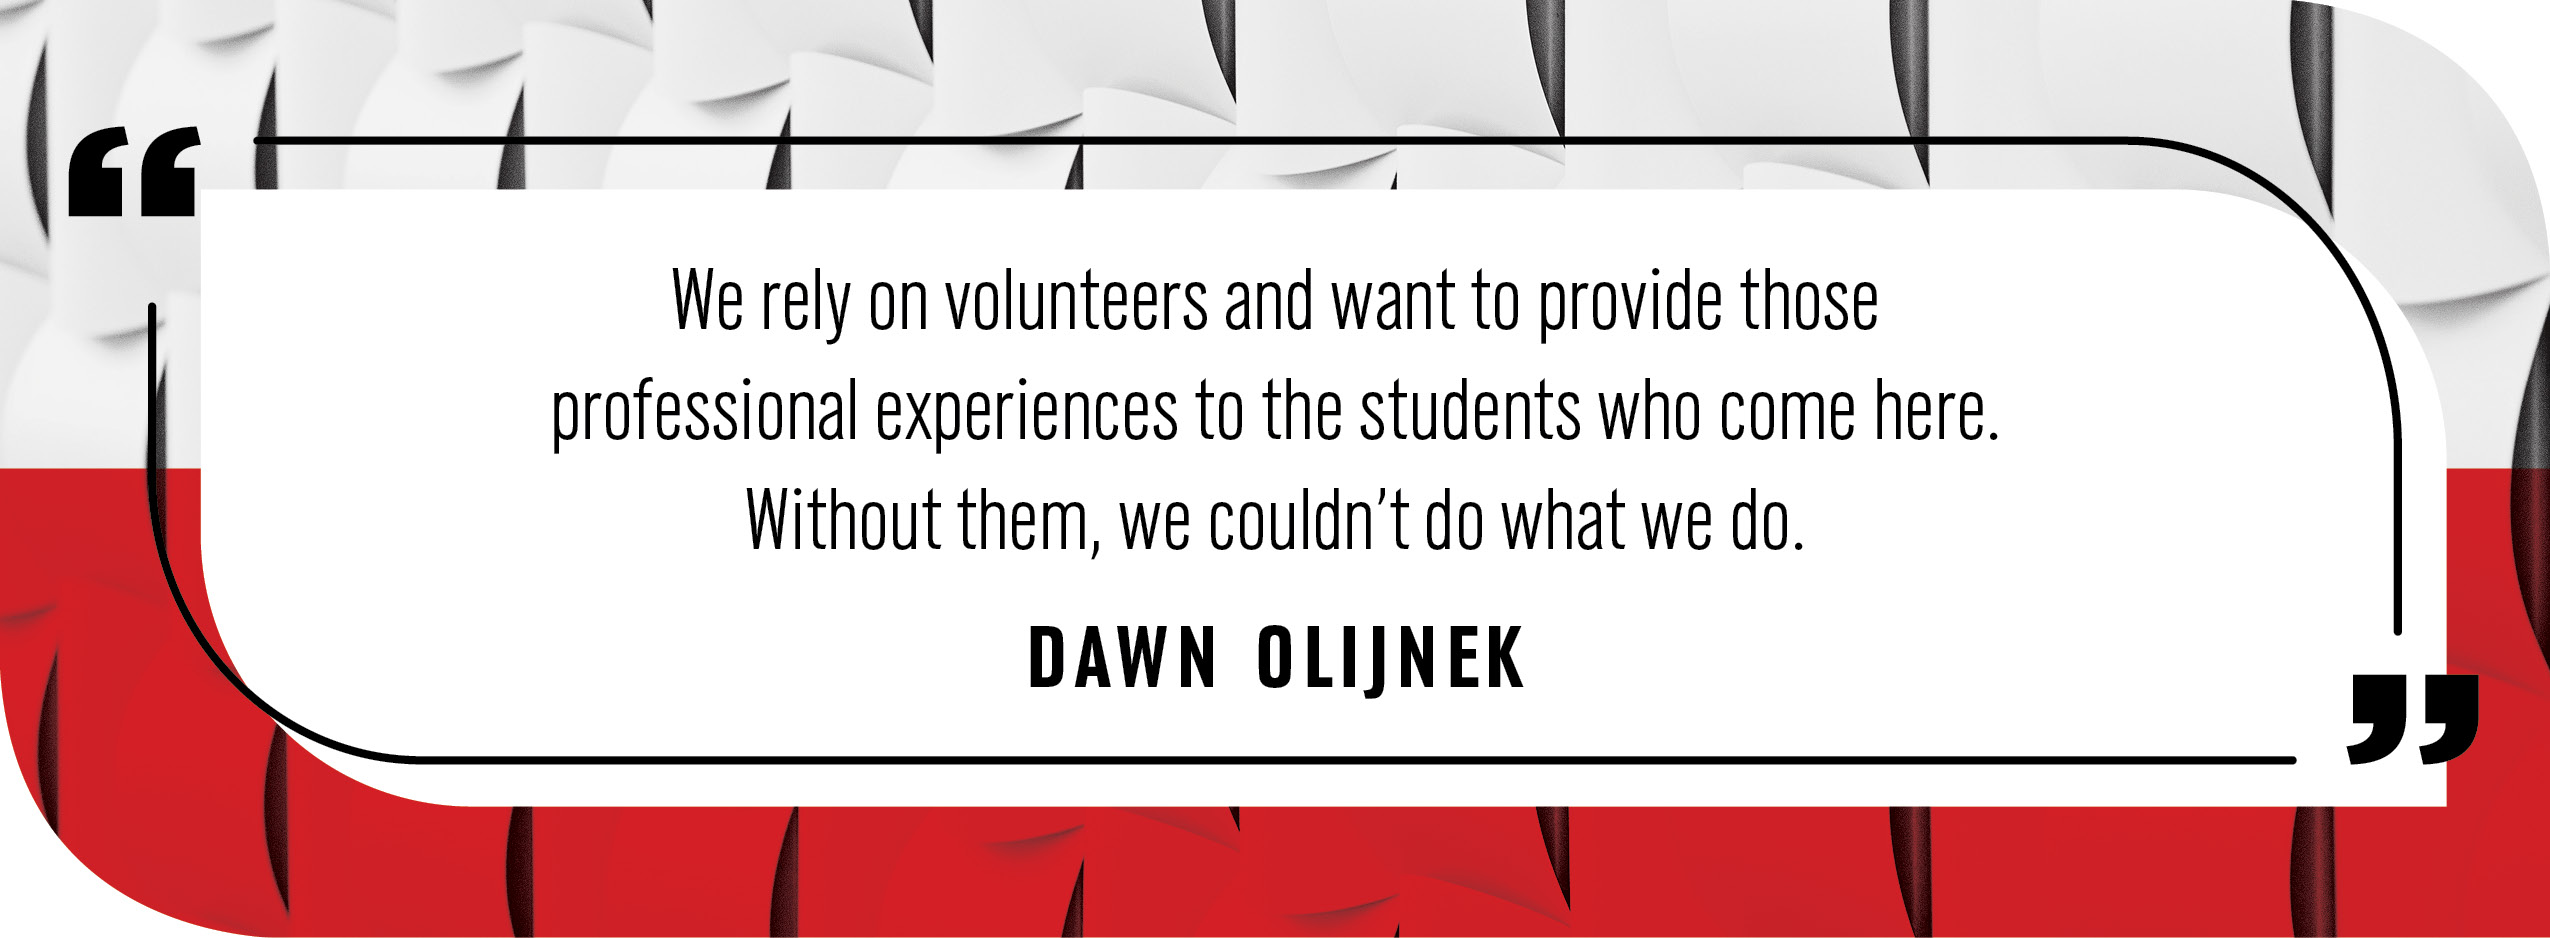 Quote by Dawn Olijnek: We rely on volunteers and want to provide those professional experiences to the students who come here.”  “Without them, we couldn’t do what we do.”